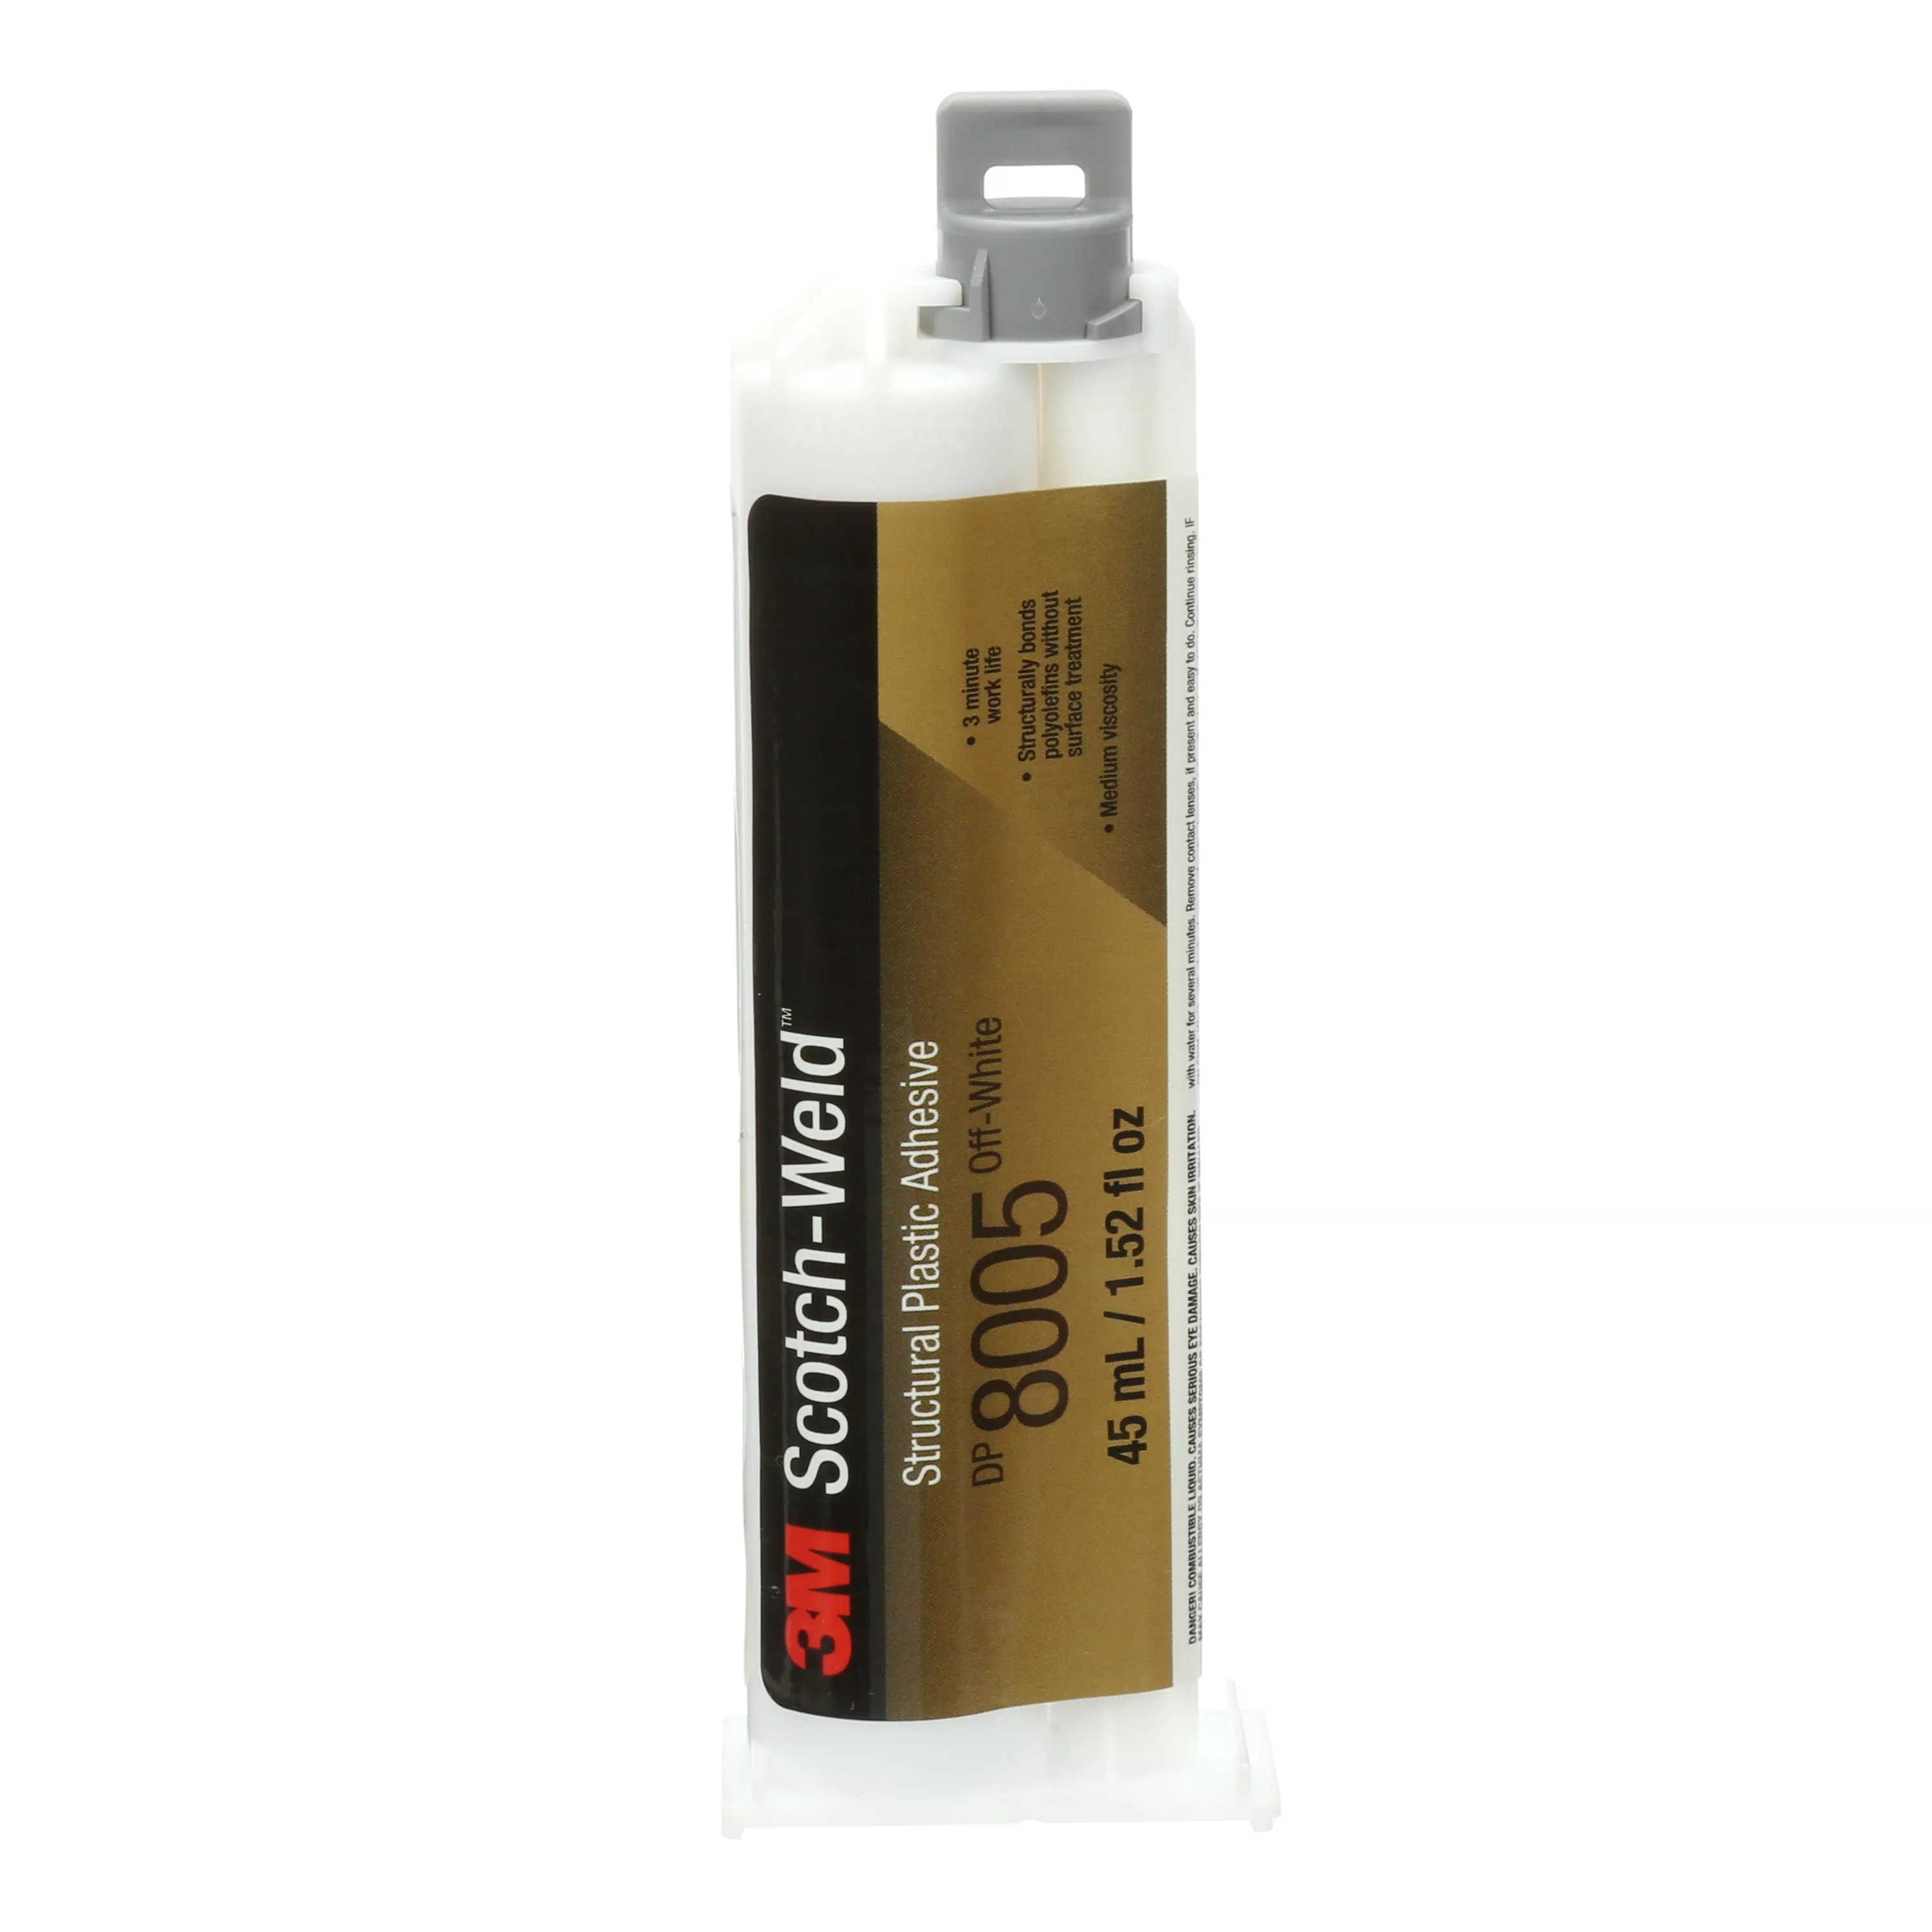 3M™ Scotch-Weld™ Structural Plastic Adhesive DP8005, Off-White, 45 mL
Duo-Pak, 12/case